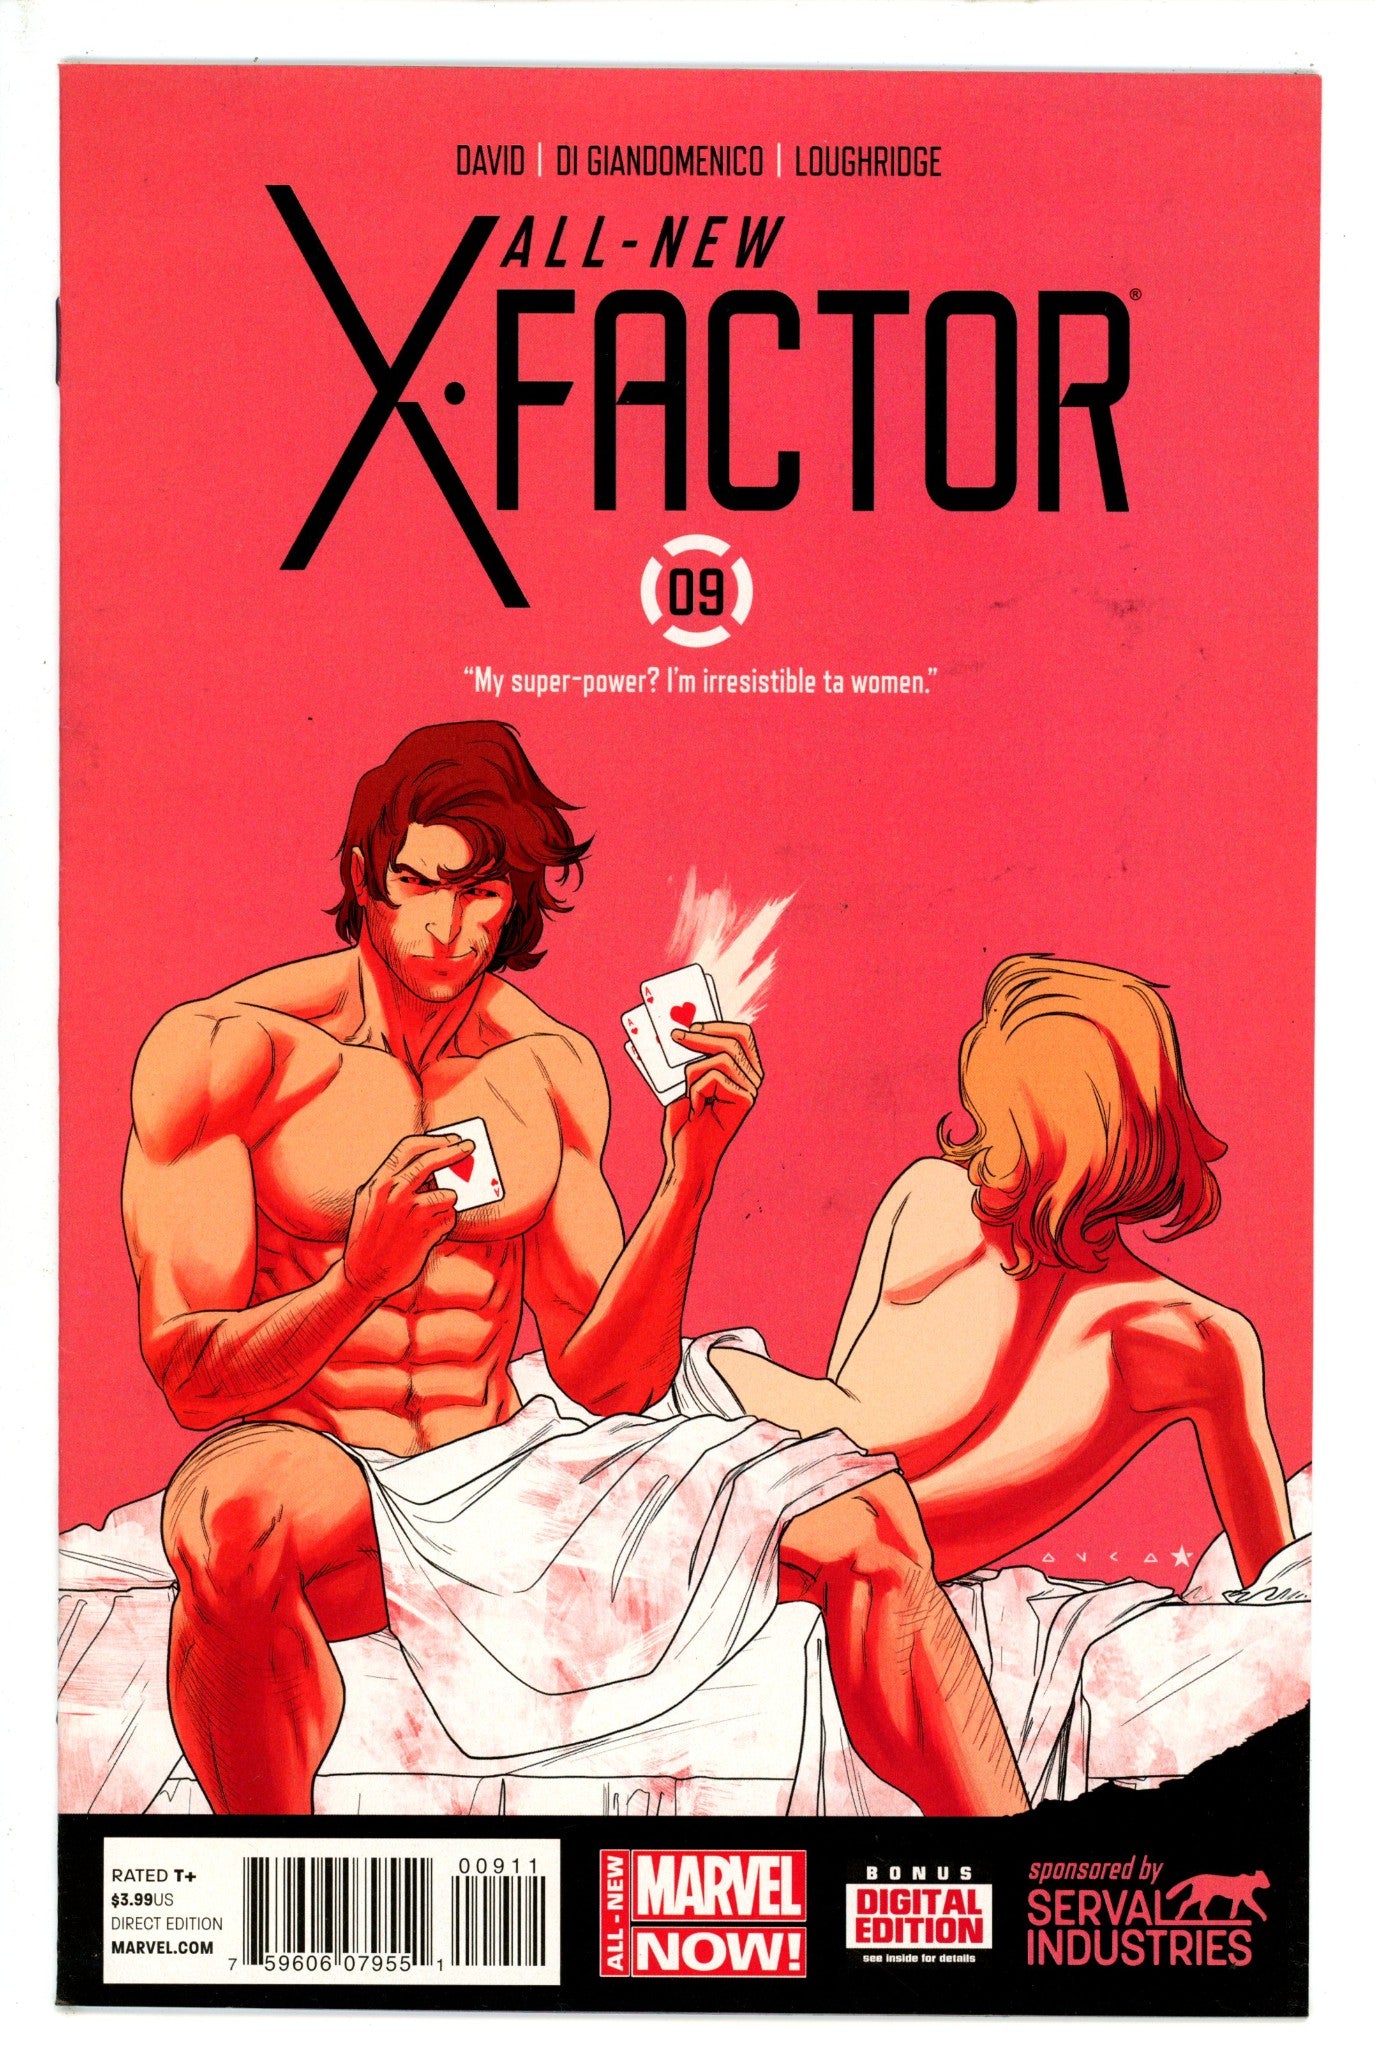 All-New X-Factor 9 (2014)